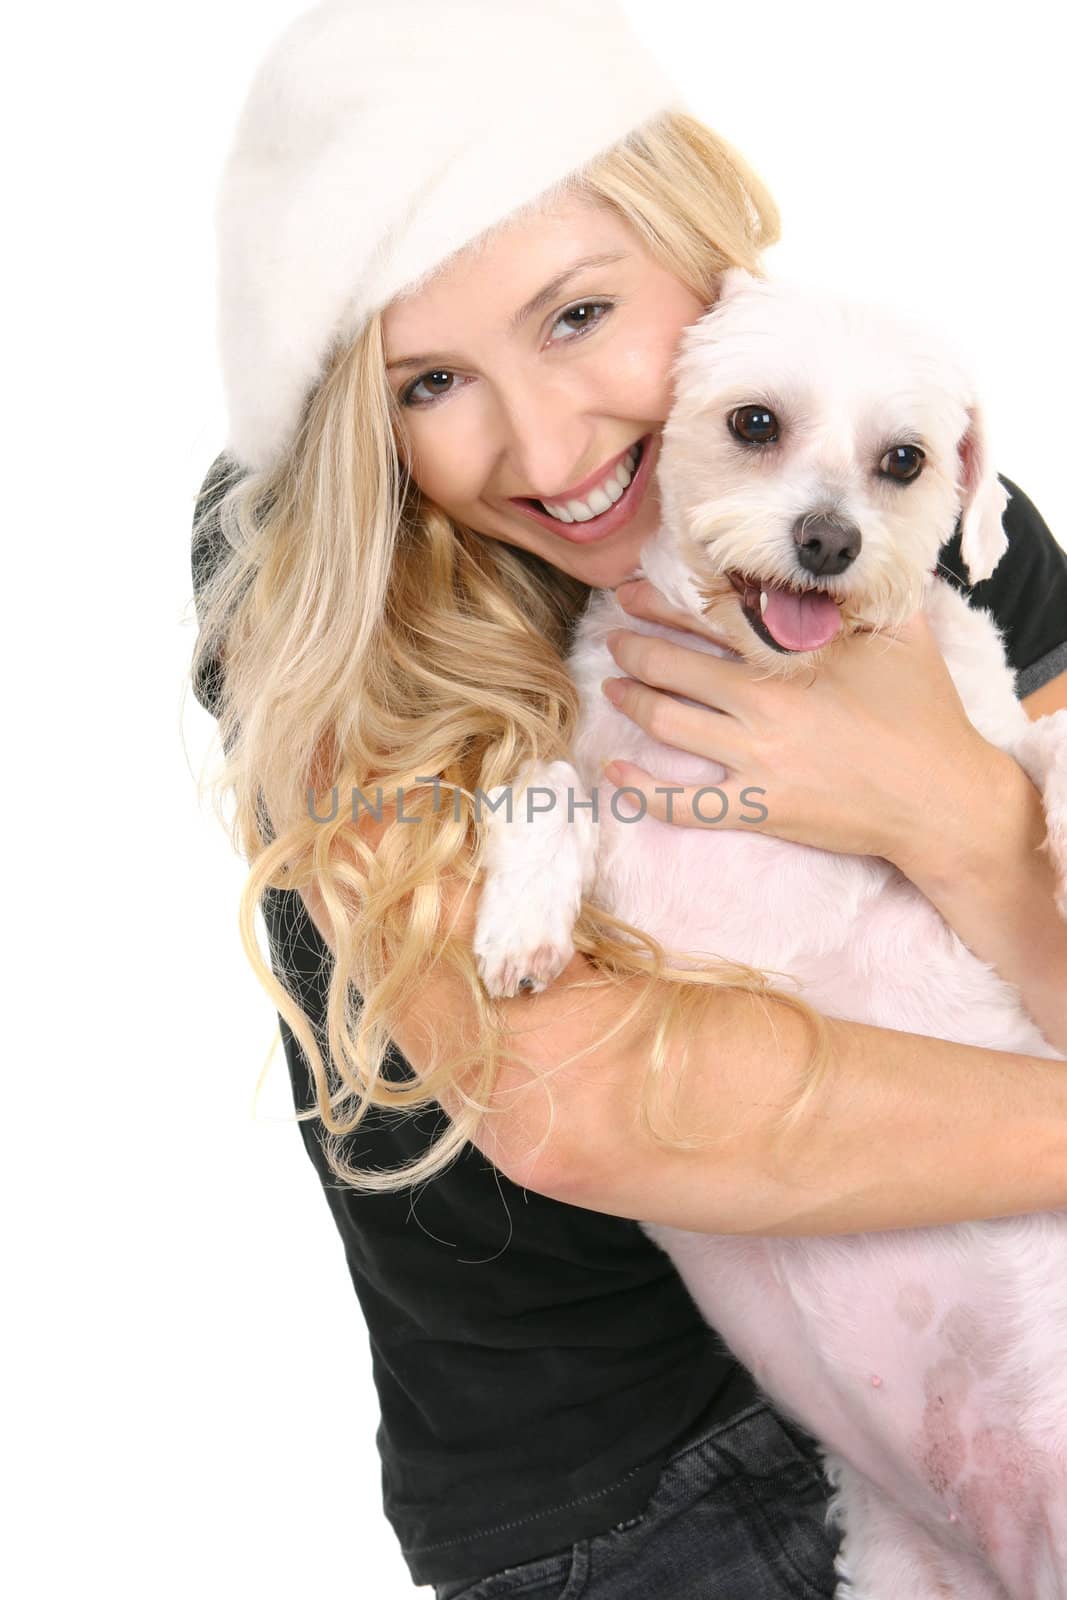 A smiling woman cuddling a cute lovable white dog